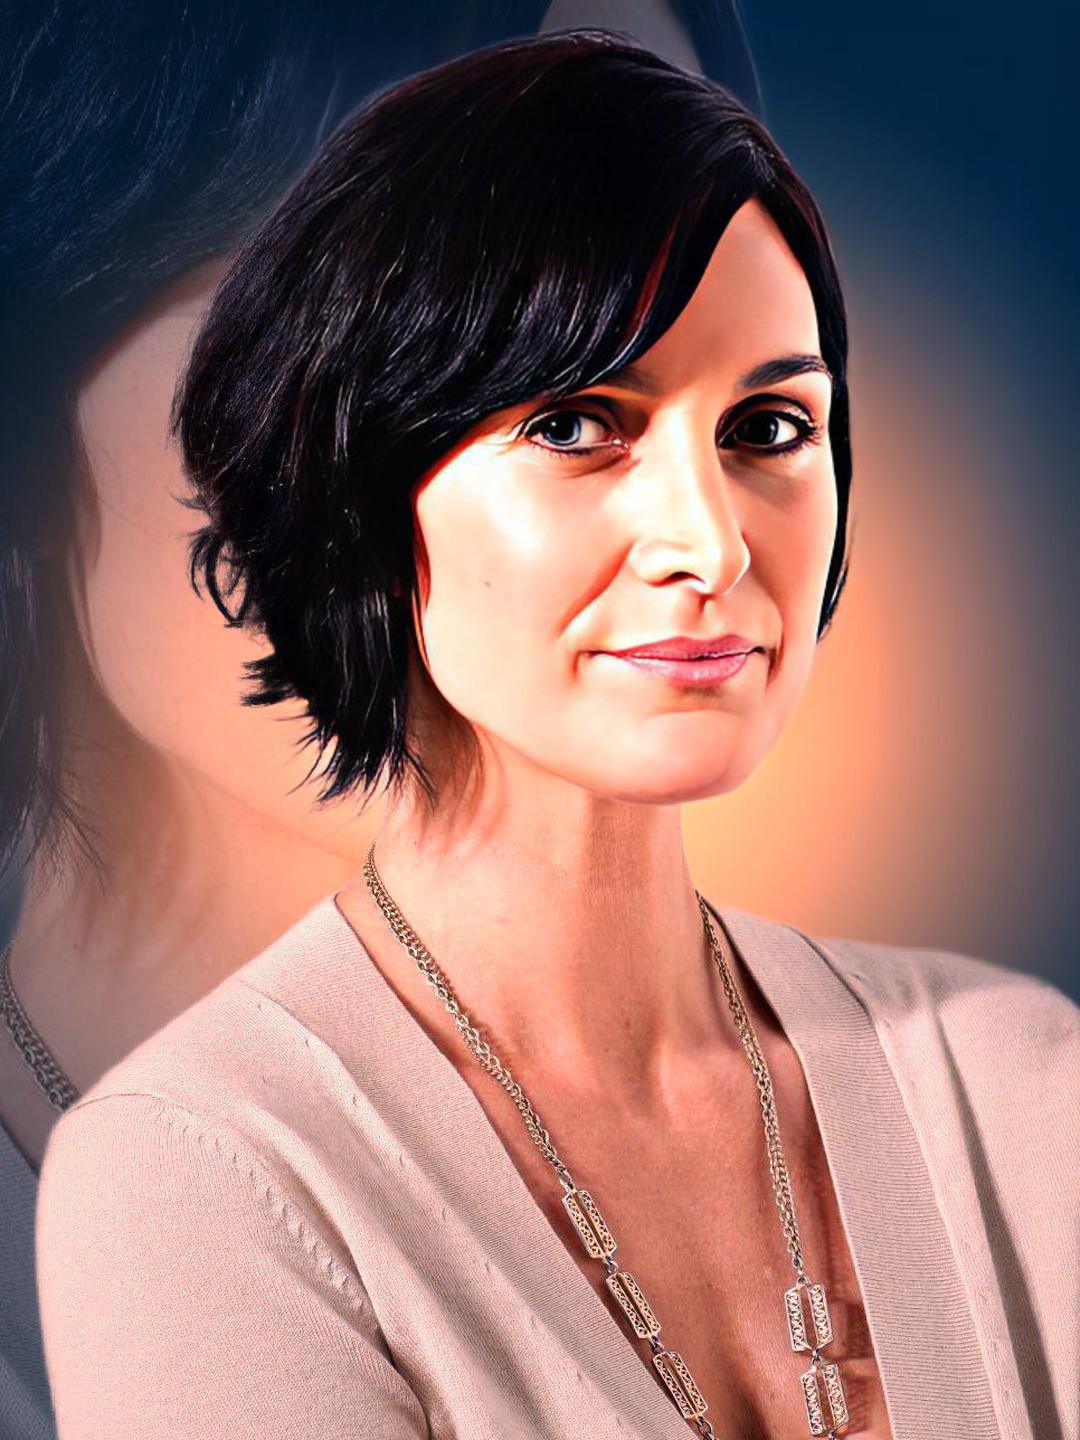 Mia Kalif Sexy Videos - Carrie-Anne Moss - Celeb ART - Beautiful Artworks of Celebrities,  Footballers, Politicians and Famous People in World | OpenSea